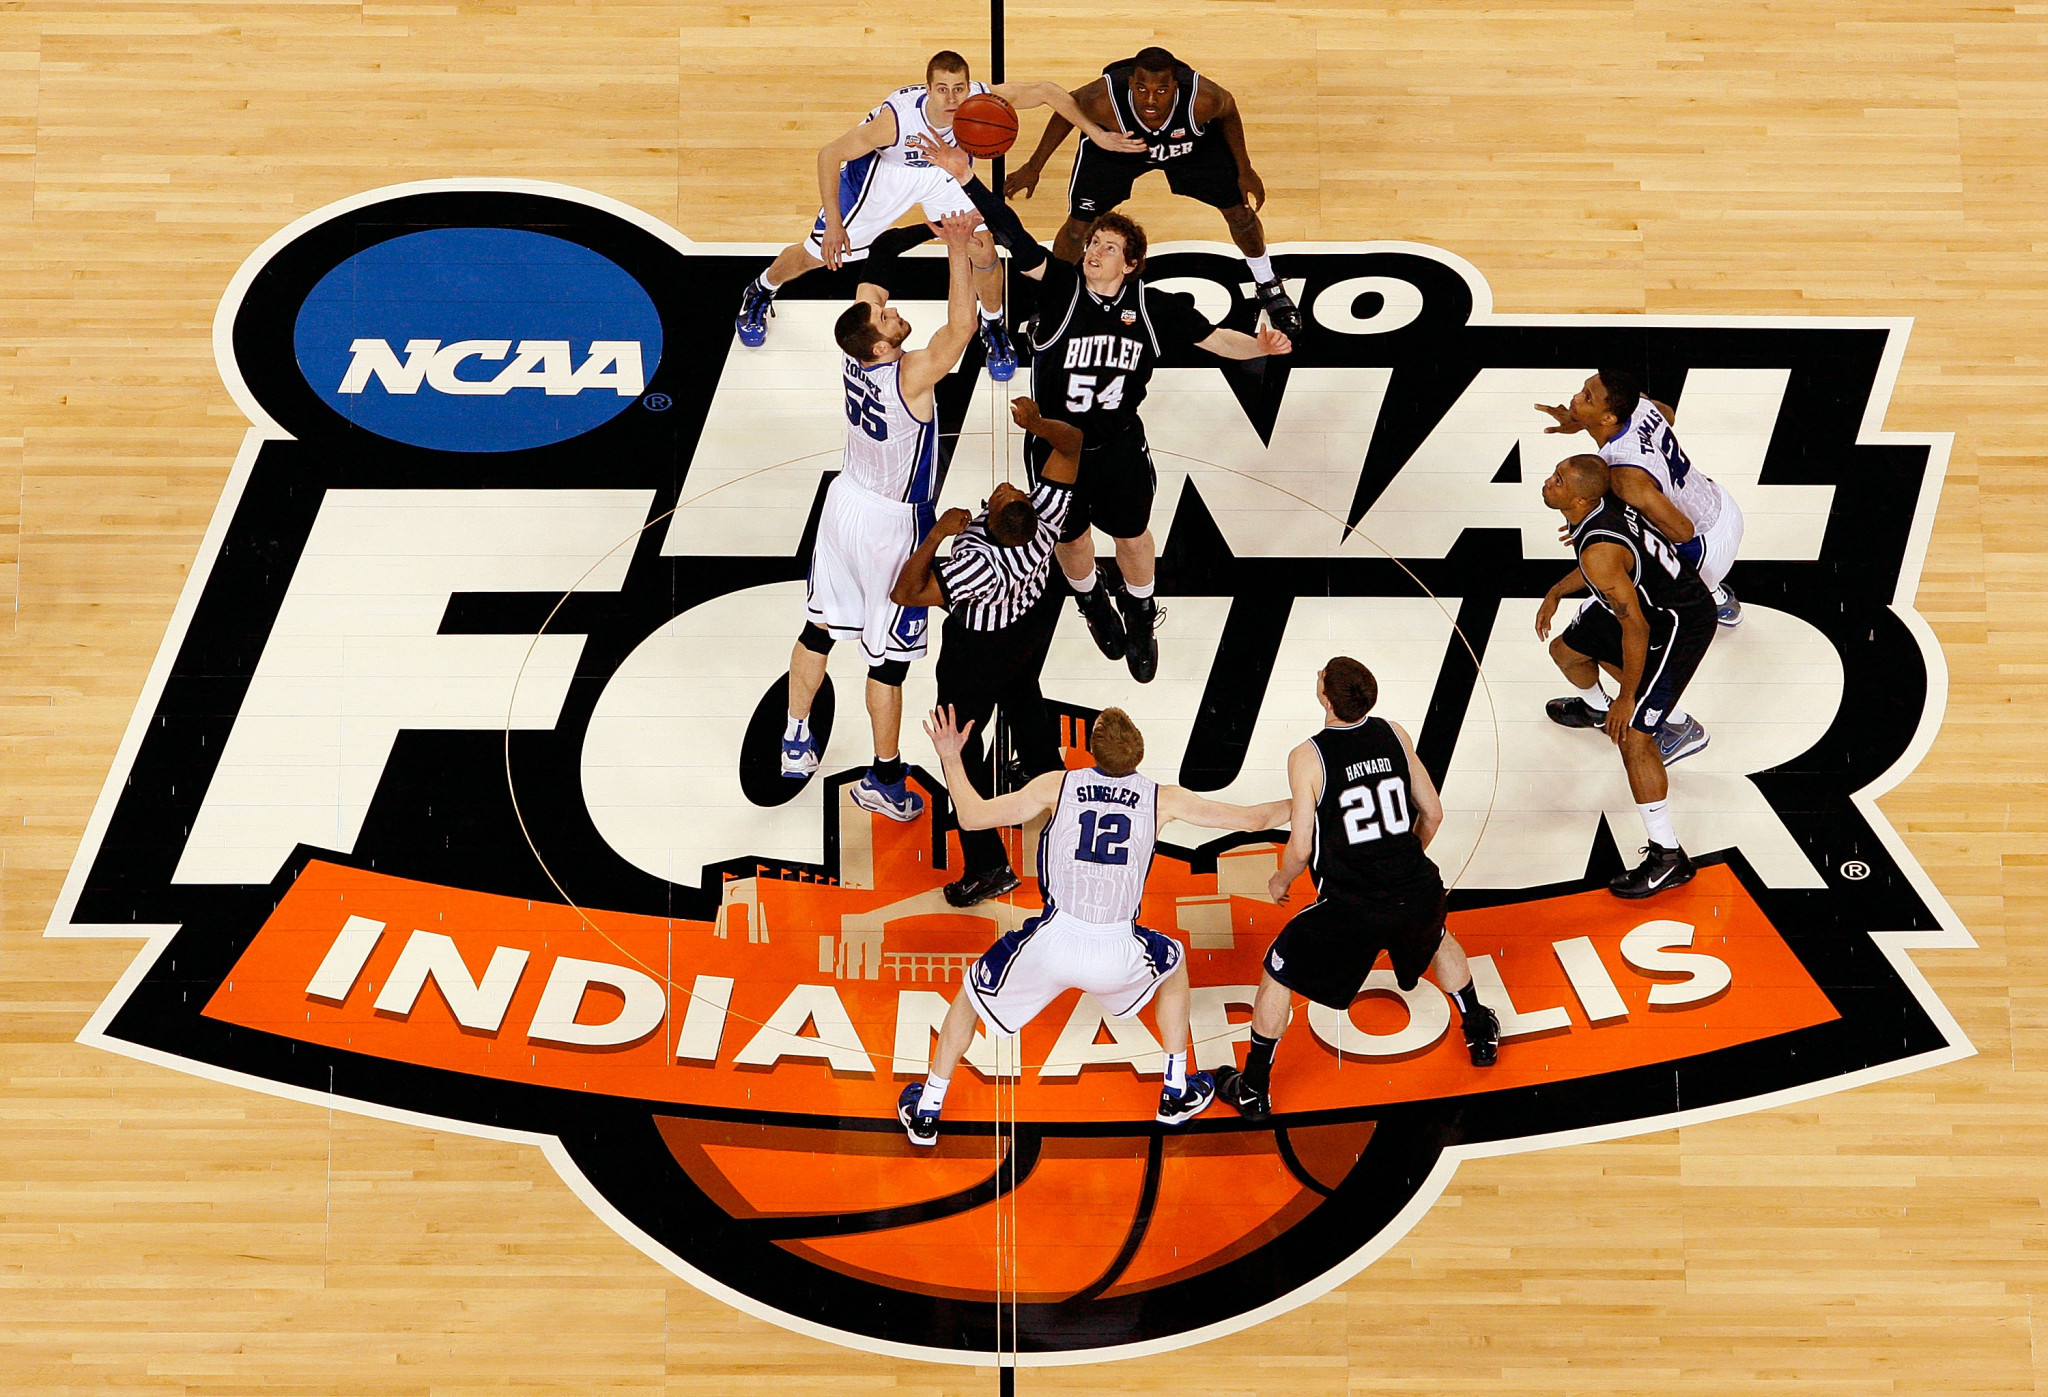 Indiana confirmed as sole host of NCAA's March Madness basketball tournament